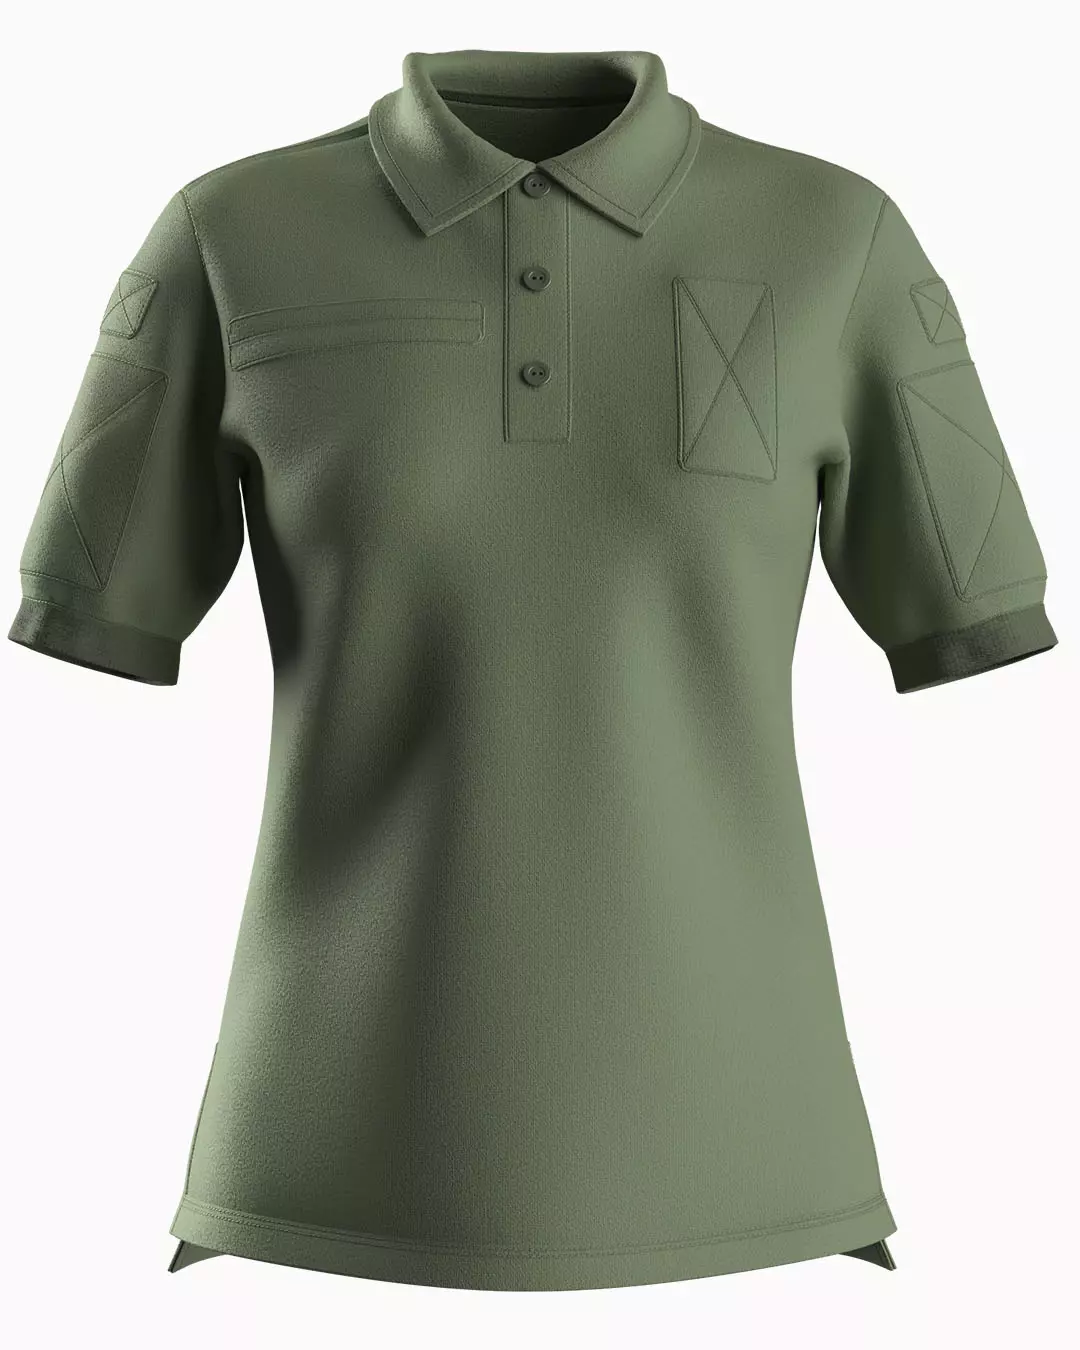 Women`s polo shirt for army